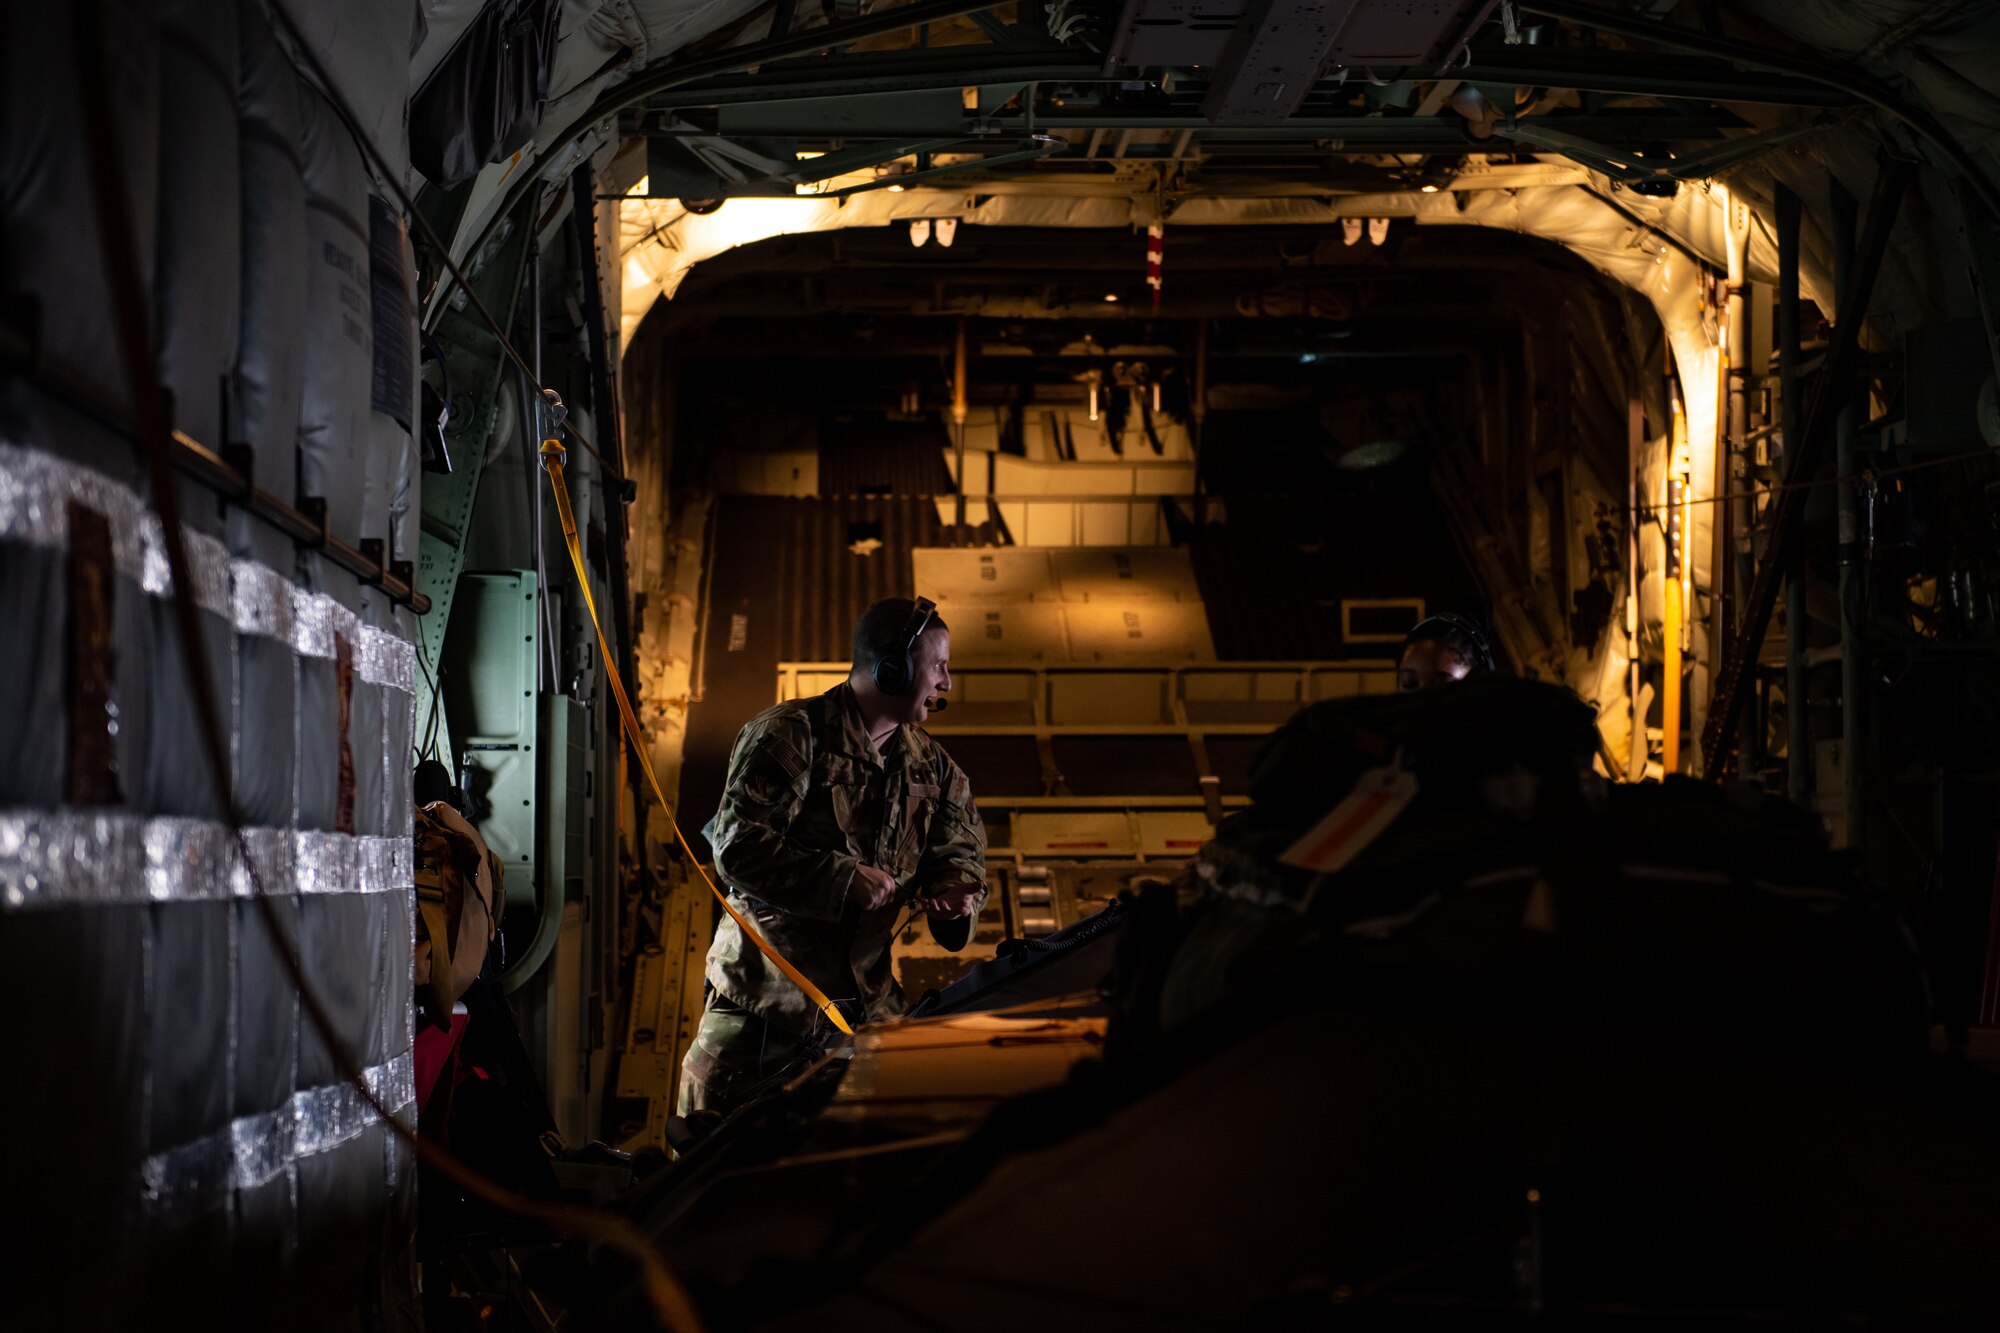 Photo of Airman working on aircraft